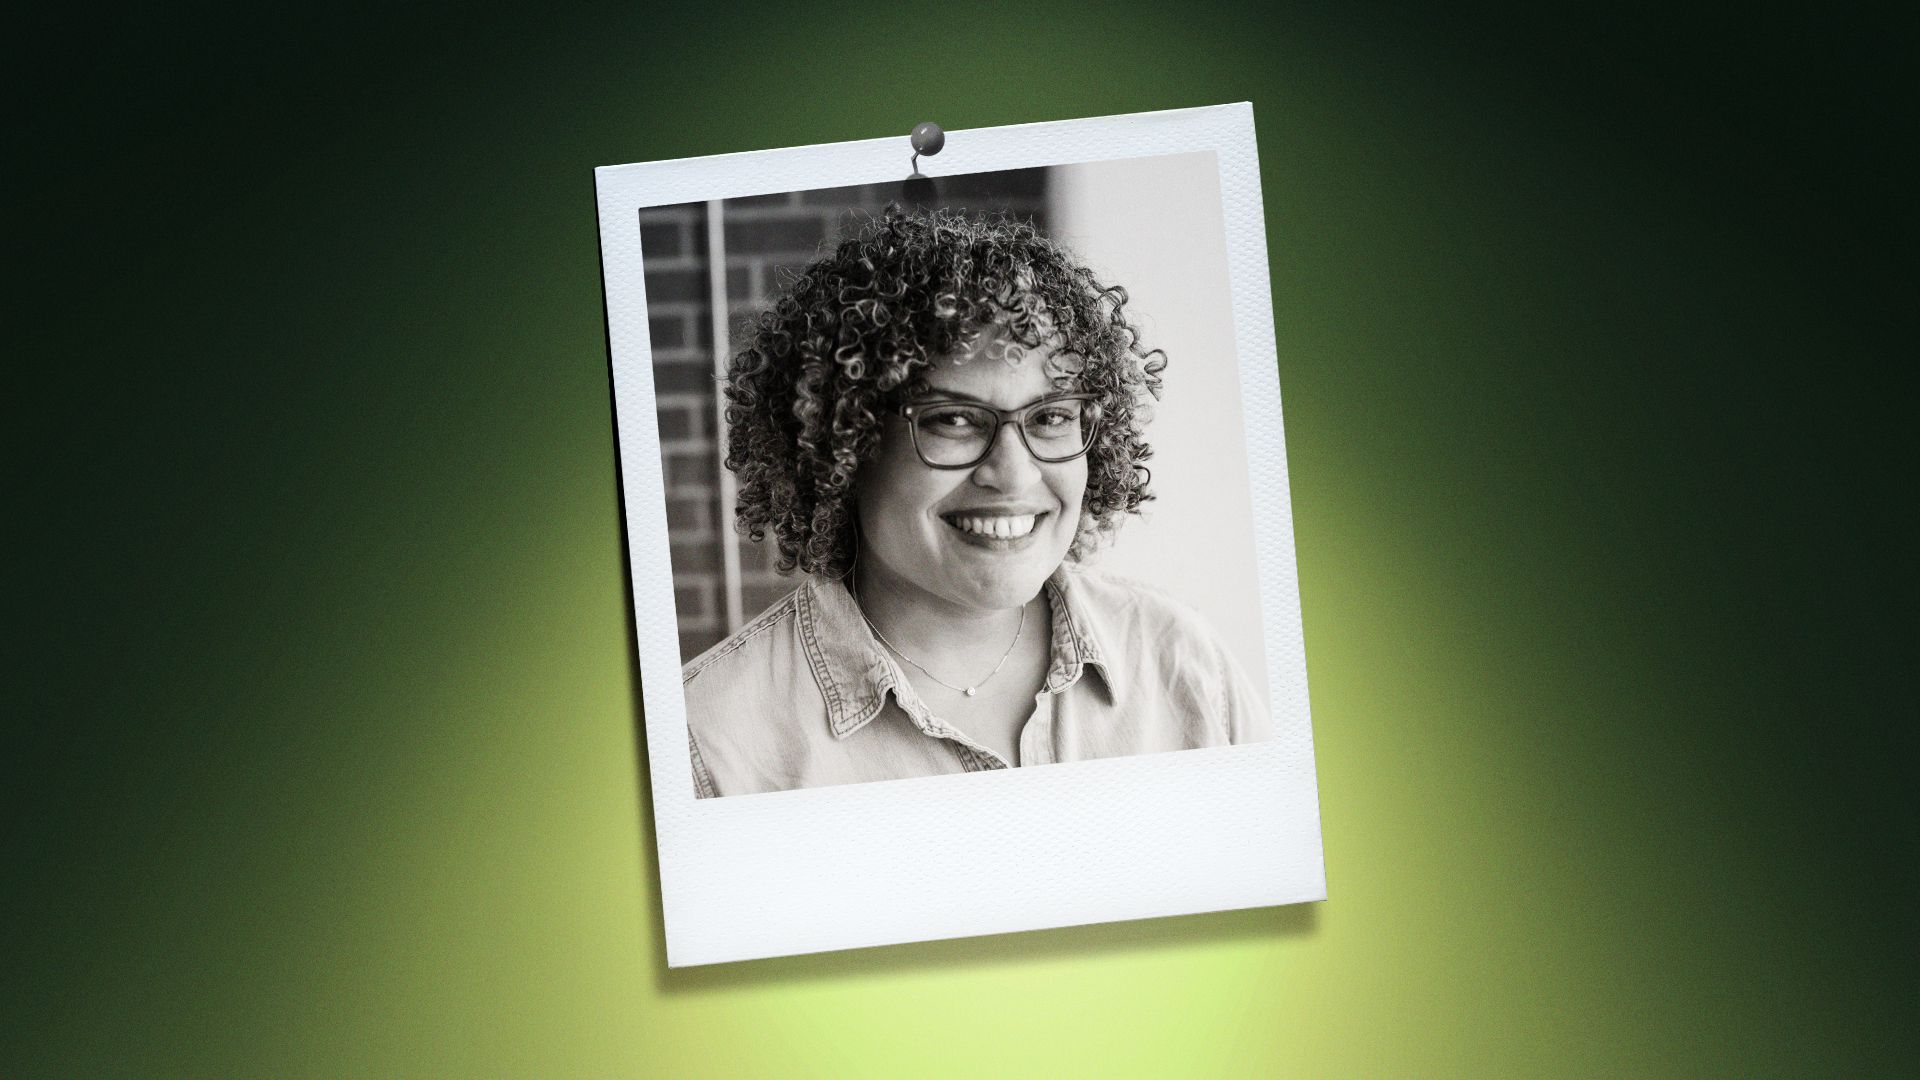 Photo illustration of Lucy Martinez, chief operating officer for Code the Dream, in the center of a Polaroid photo under a green spotlight.